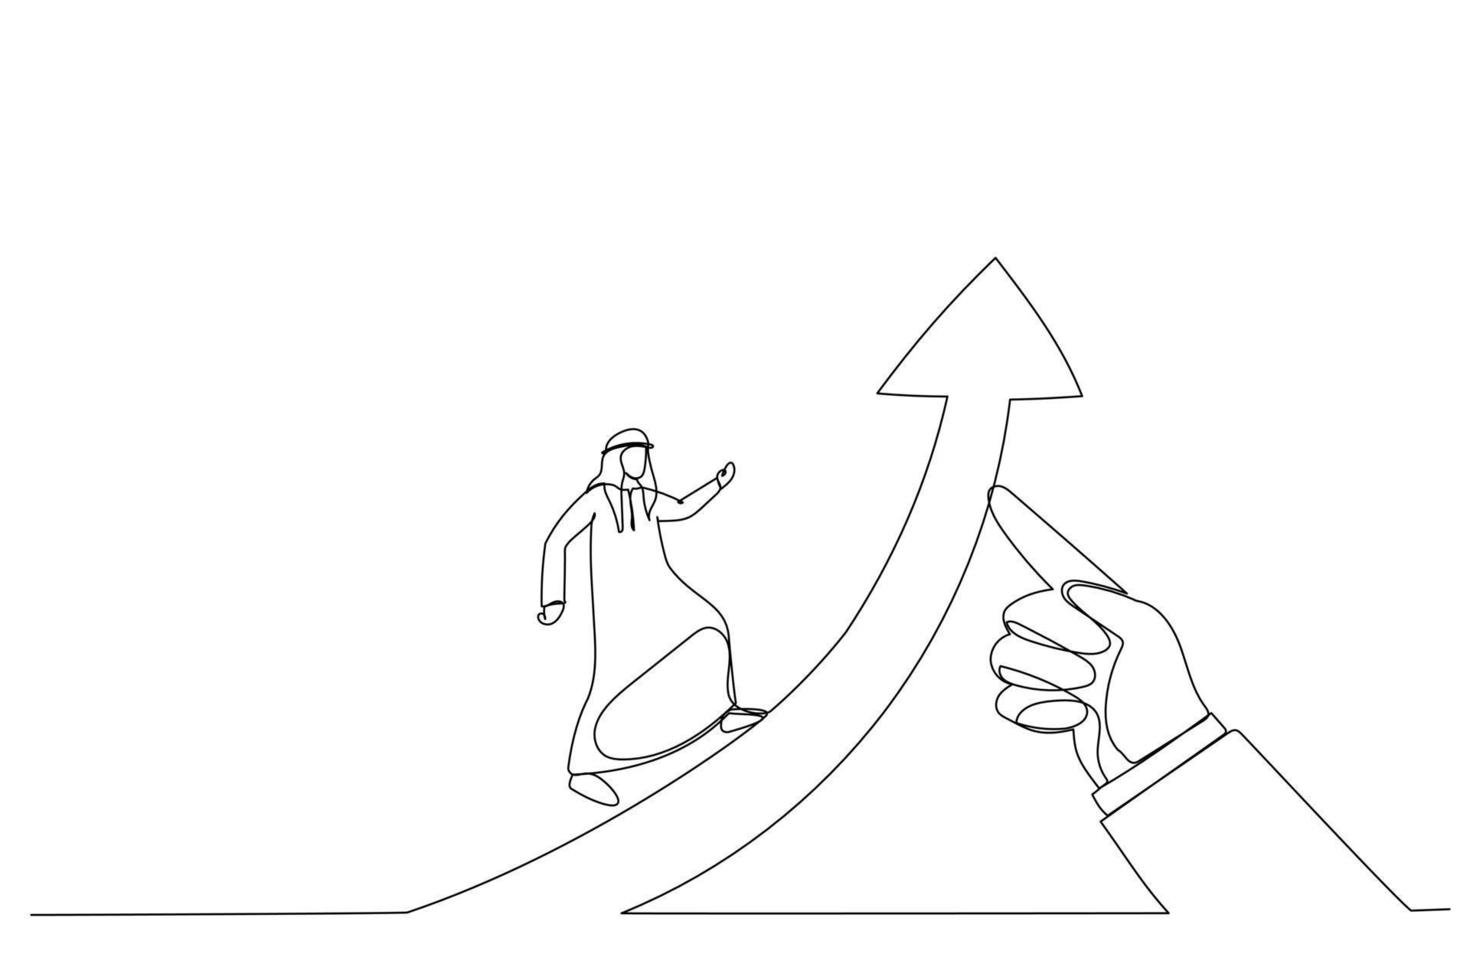 Cartoon of arab businessman running on arrow of success raised by giant hand of leader. Metaphor for business success. Single continuous line art style vector